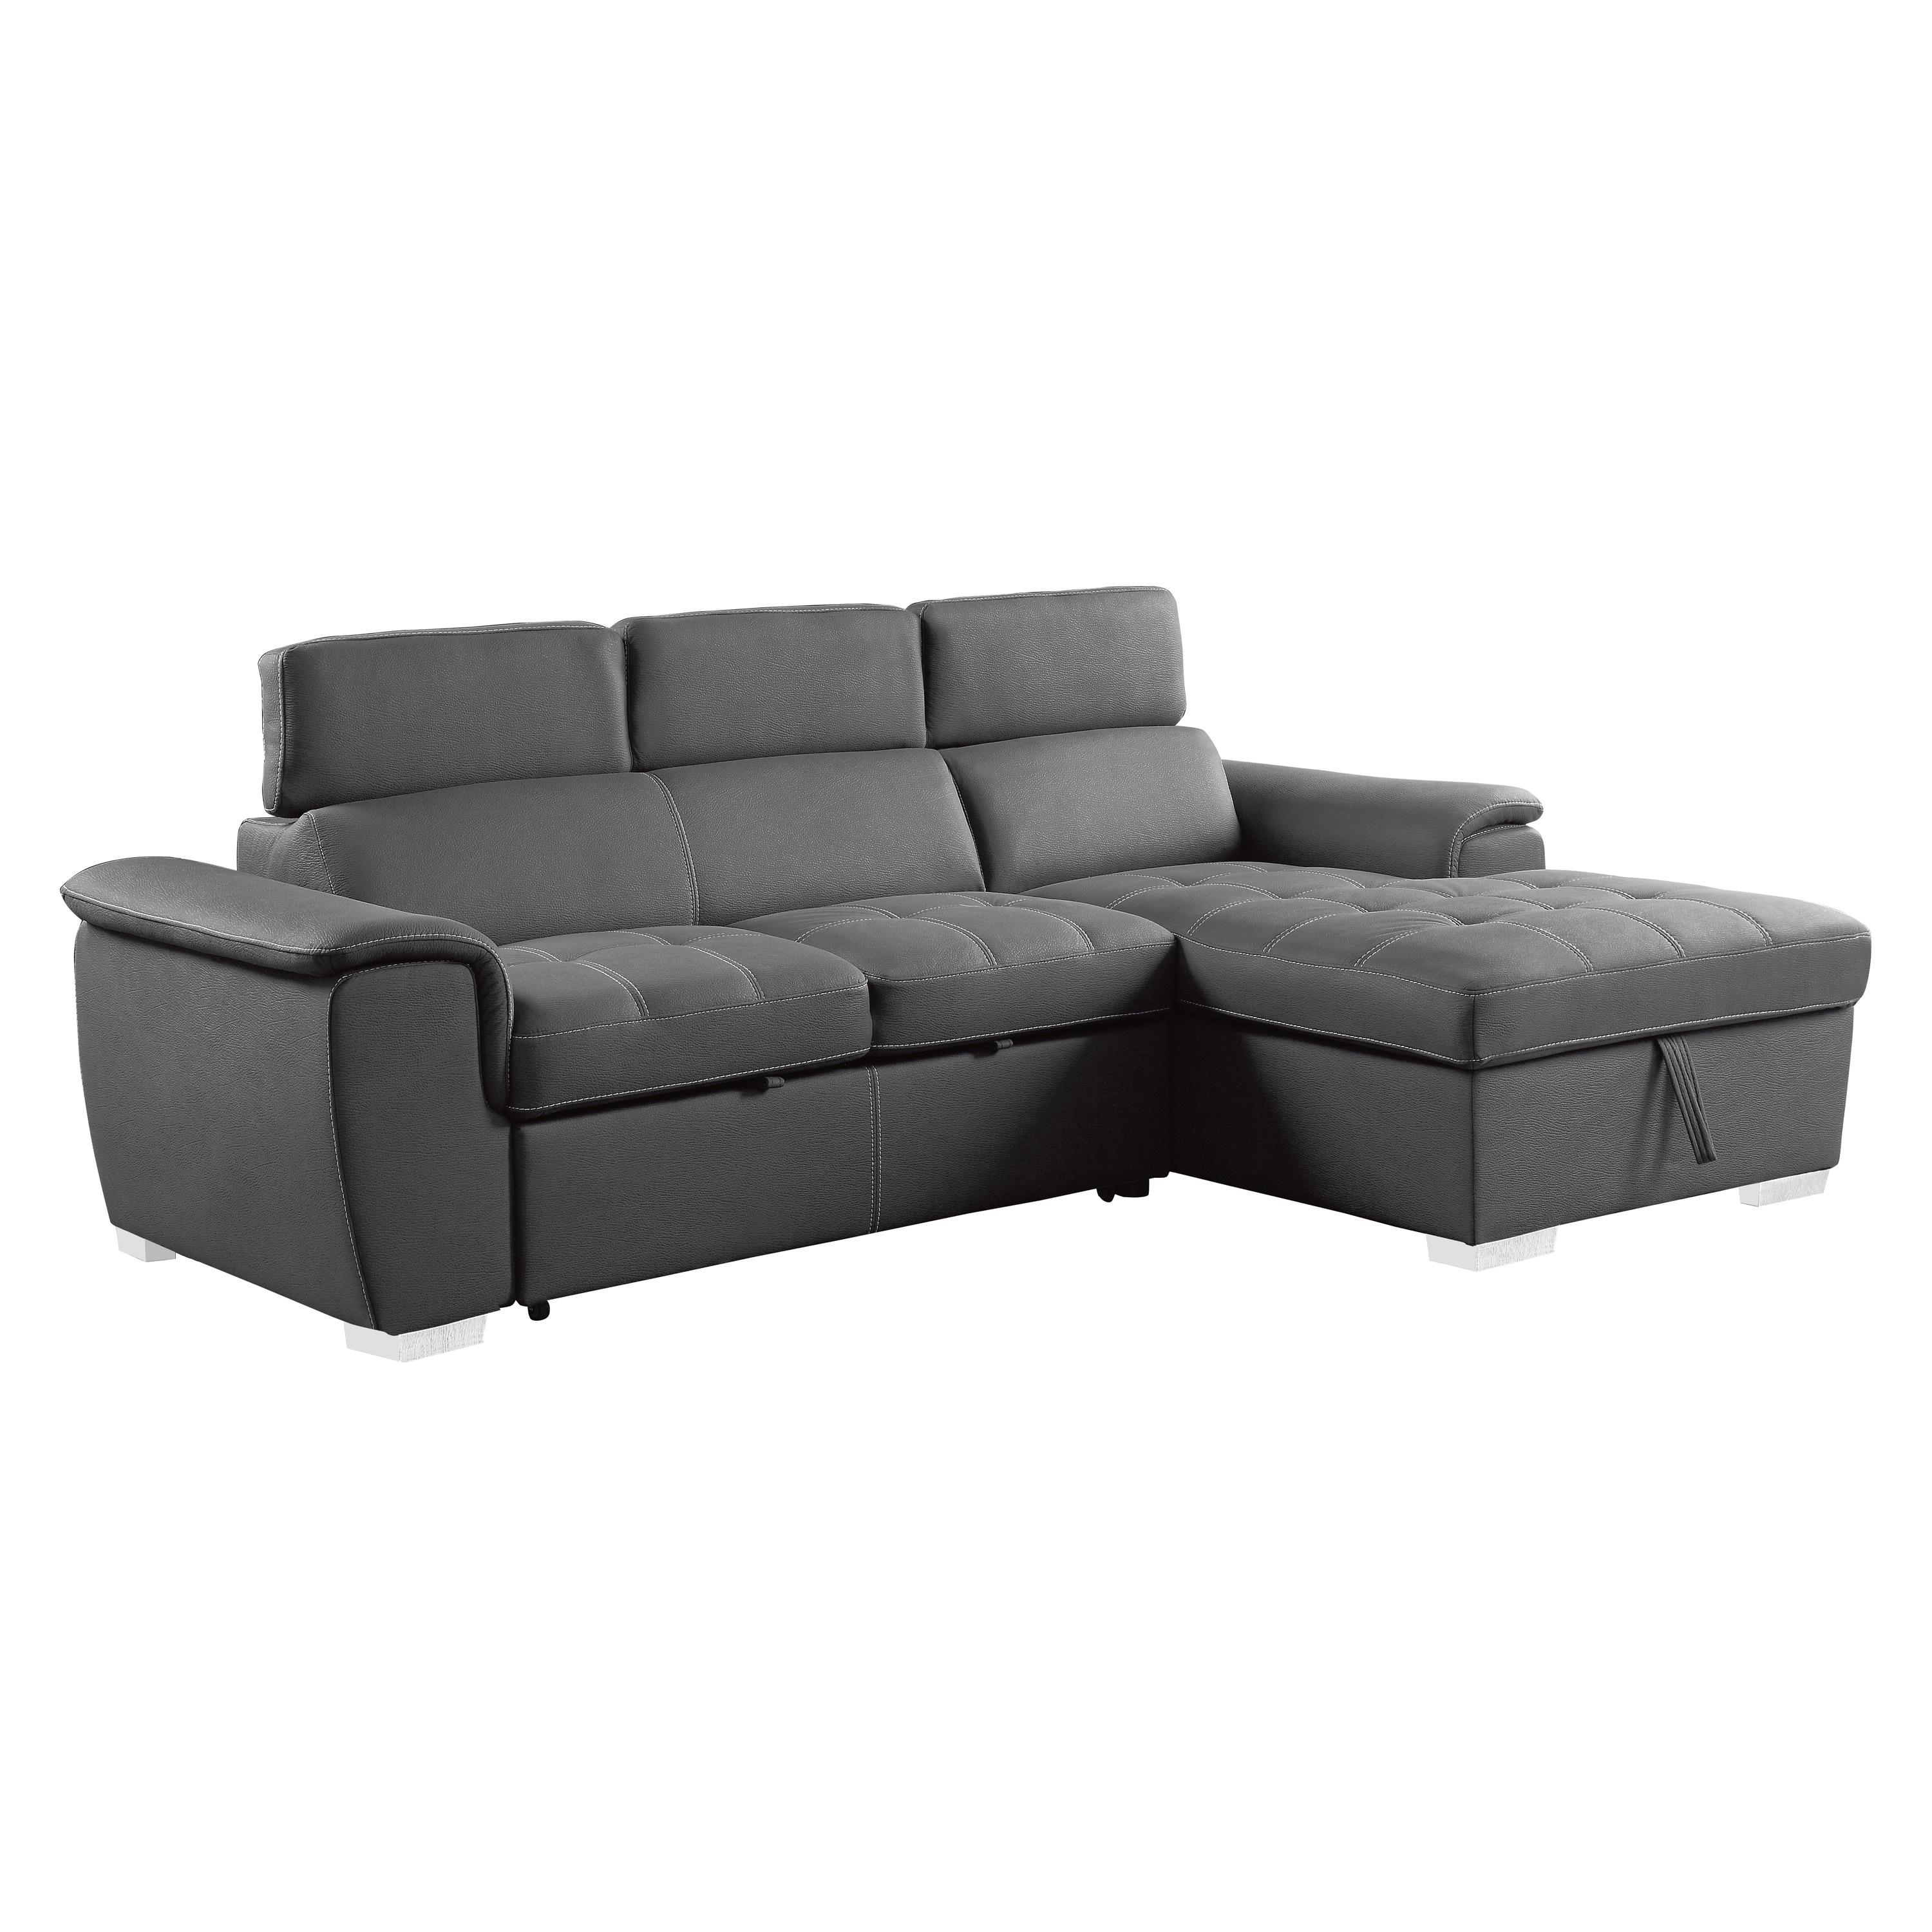 

    
Contemporary Gray Microfiber 2-Piece Sectional Homelegance 8228GY* Ferriday
